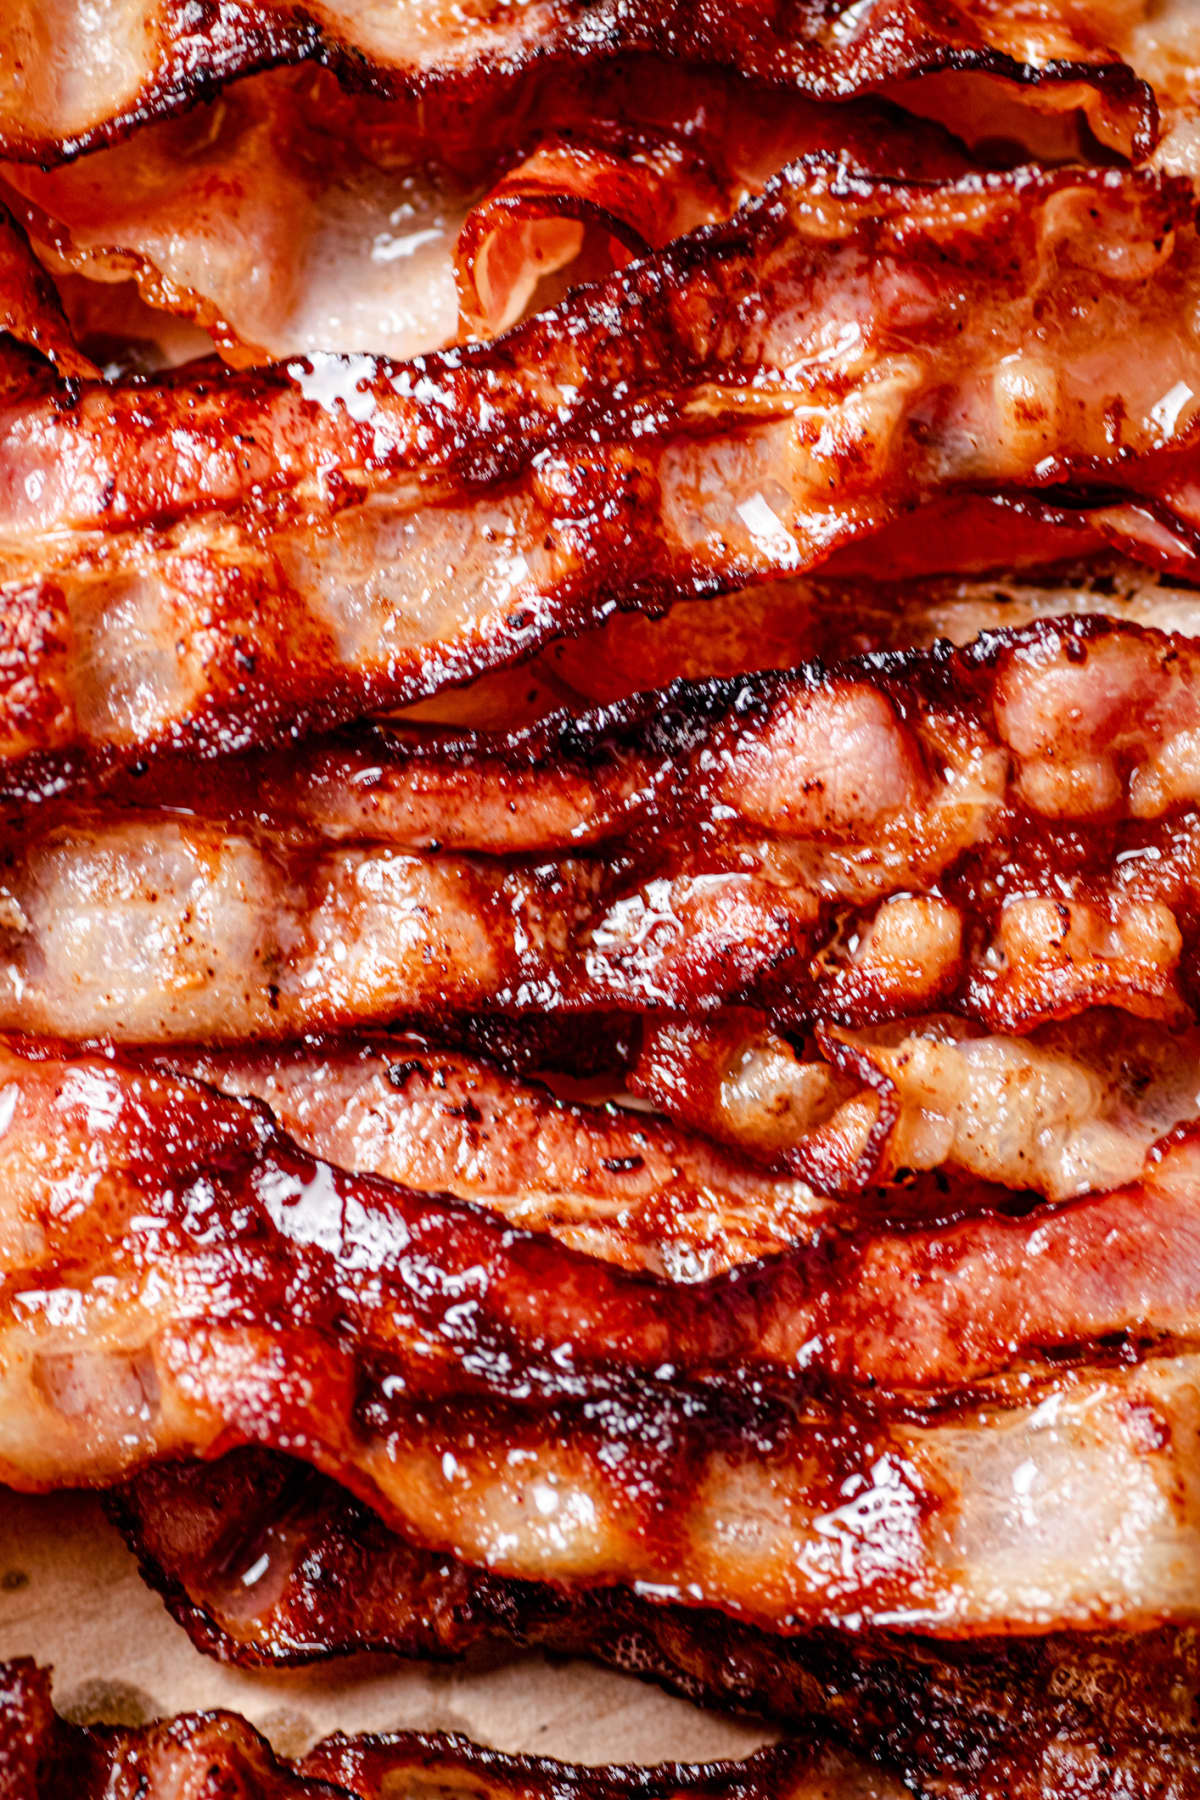 Strips of fragrant fried bacon